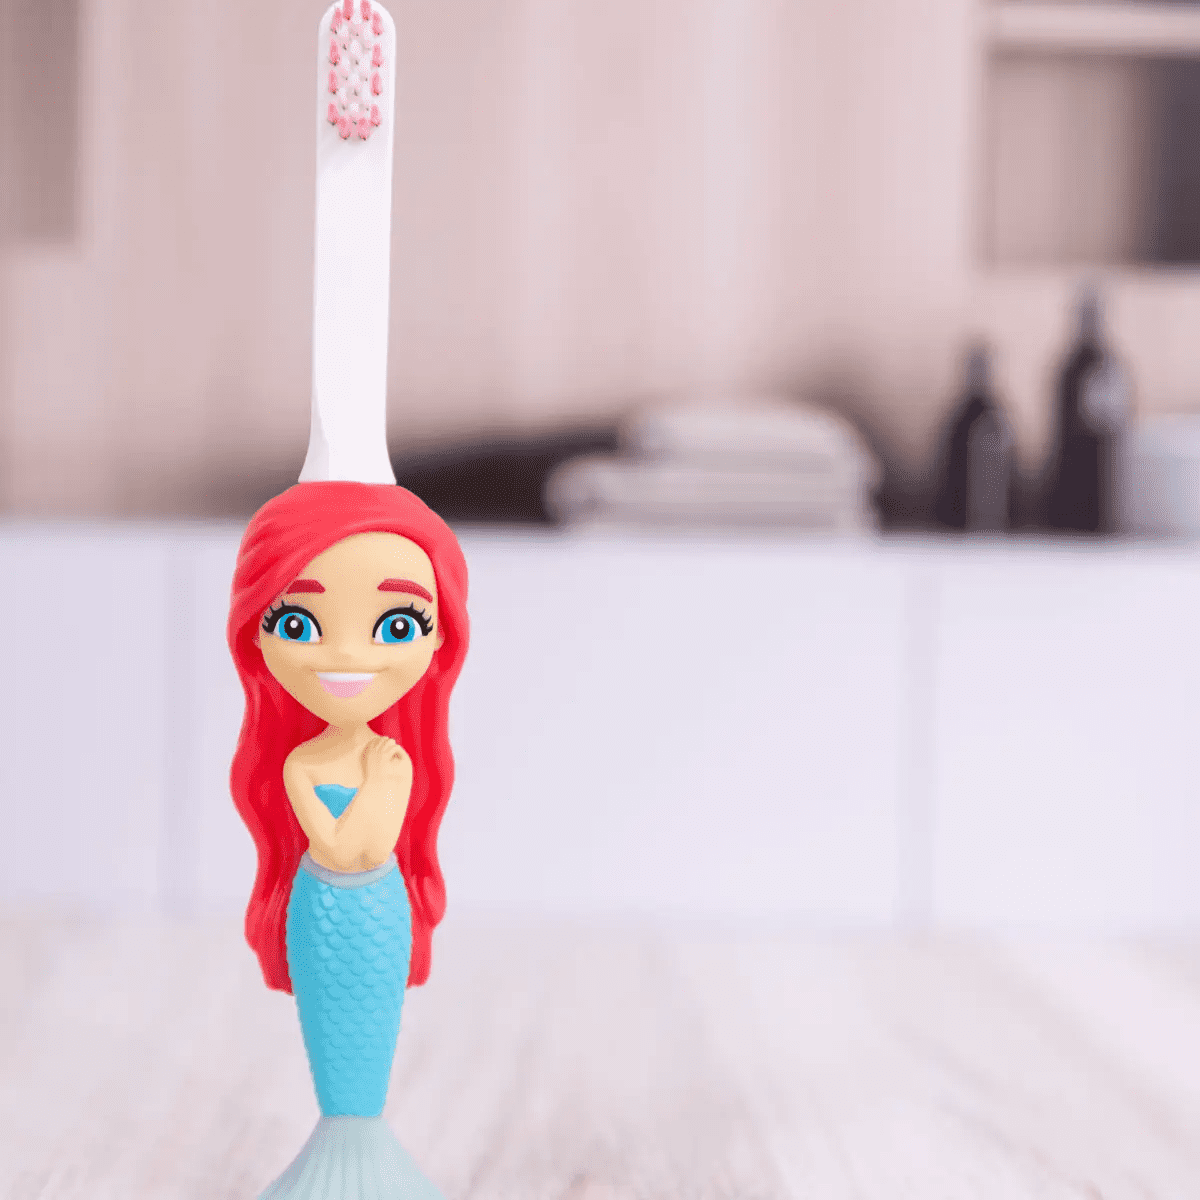 Toothbrush detailed with an Aqua the Mermaid design